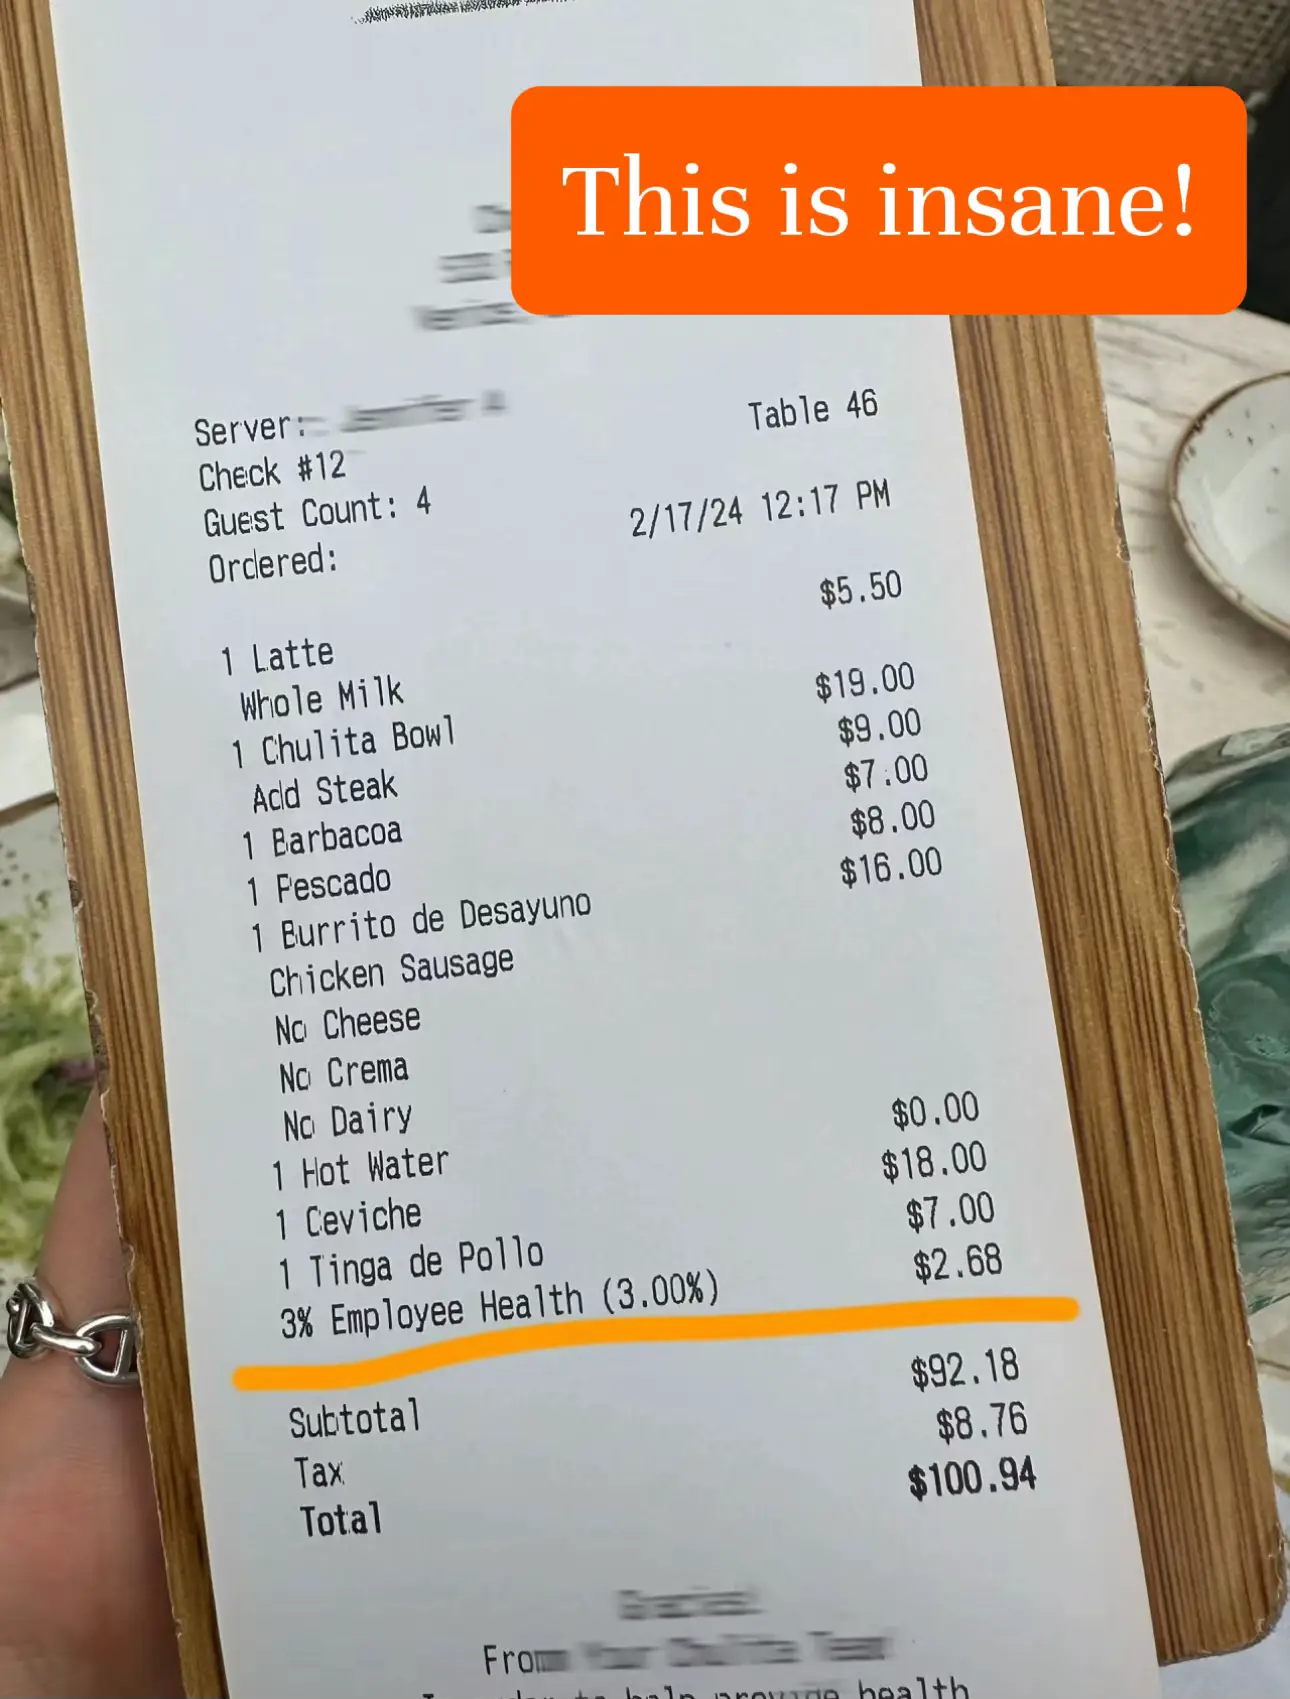  A receipt for a meal at a restaurant with a $3.00 employee health plan.